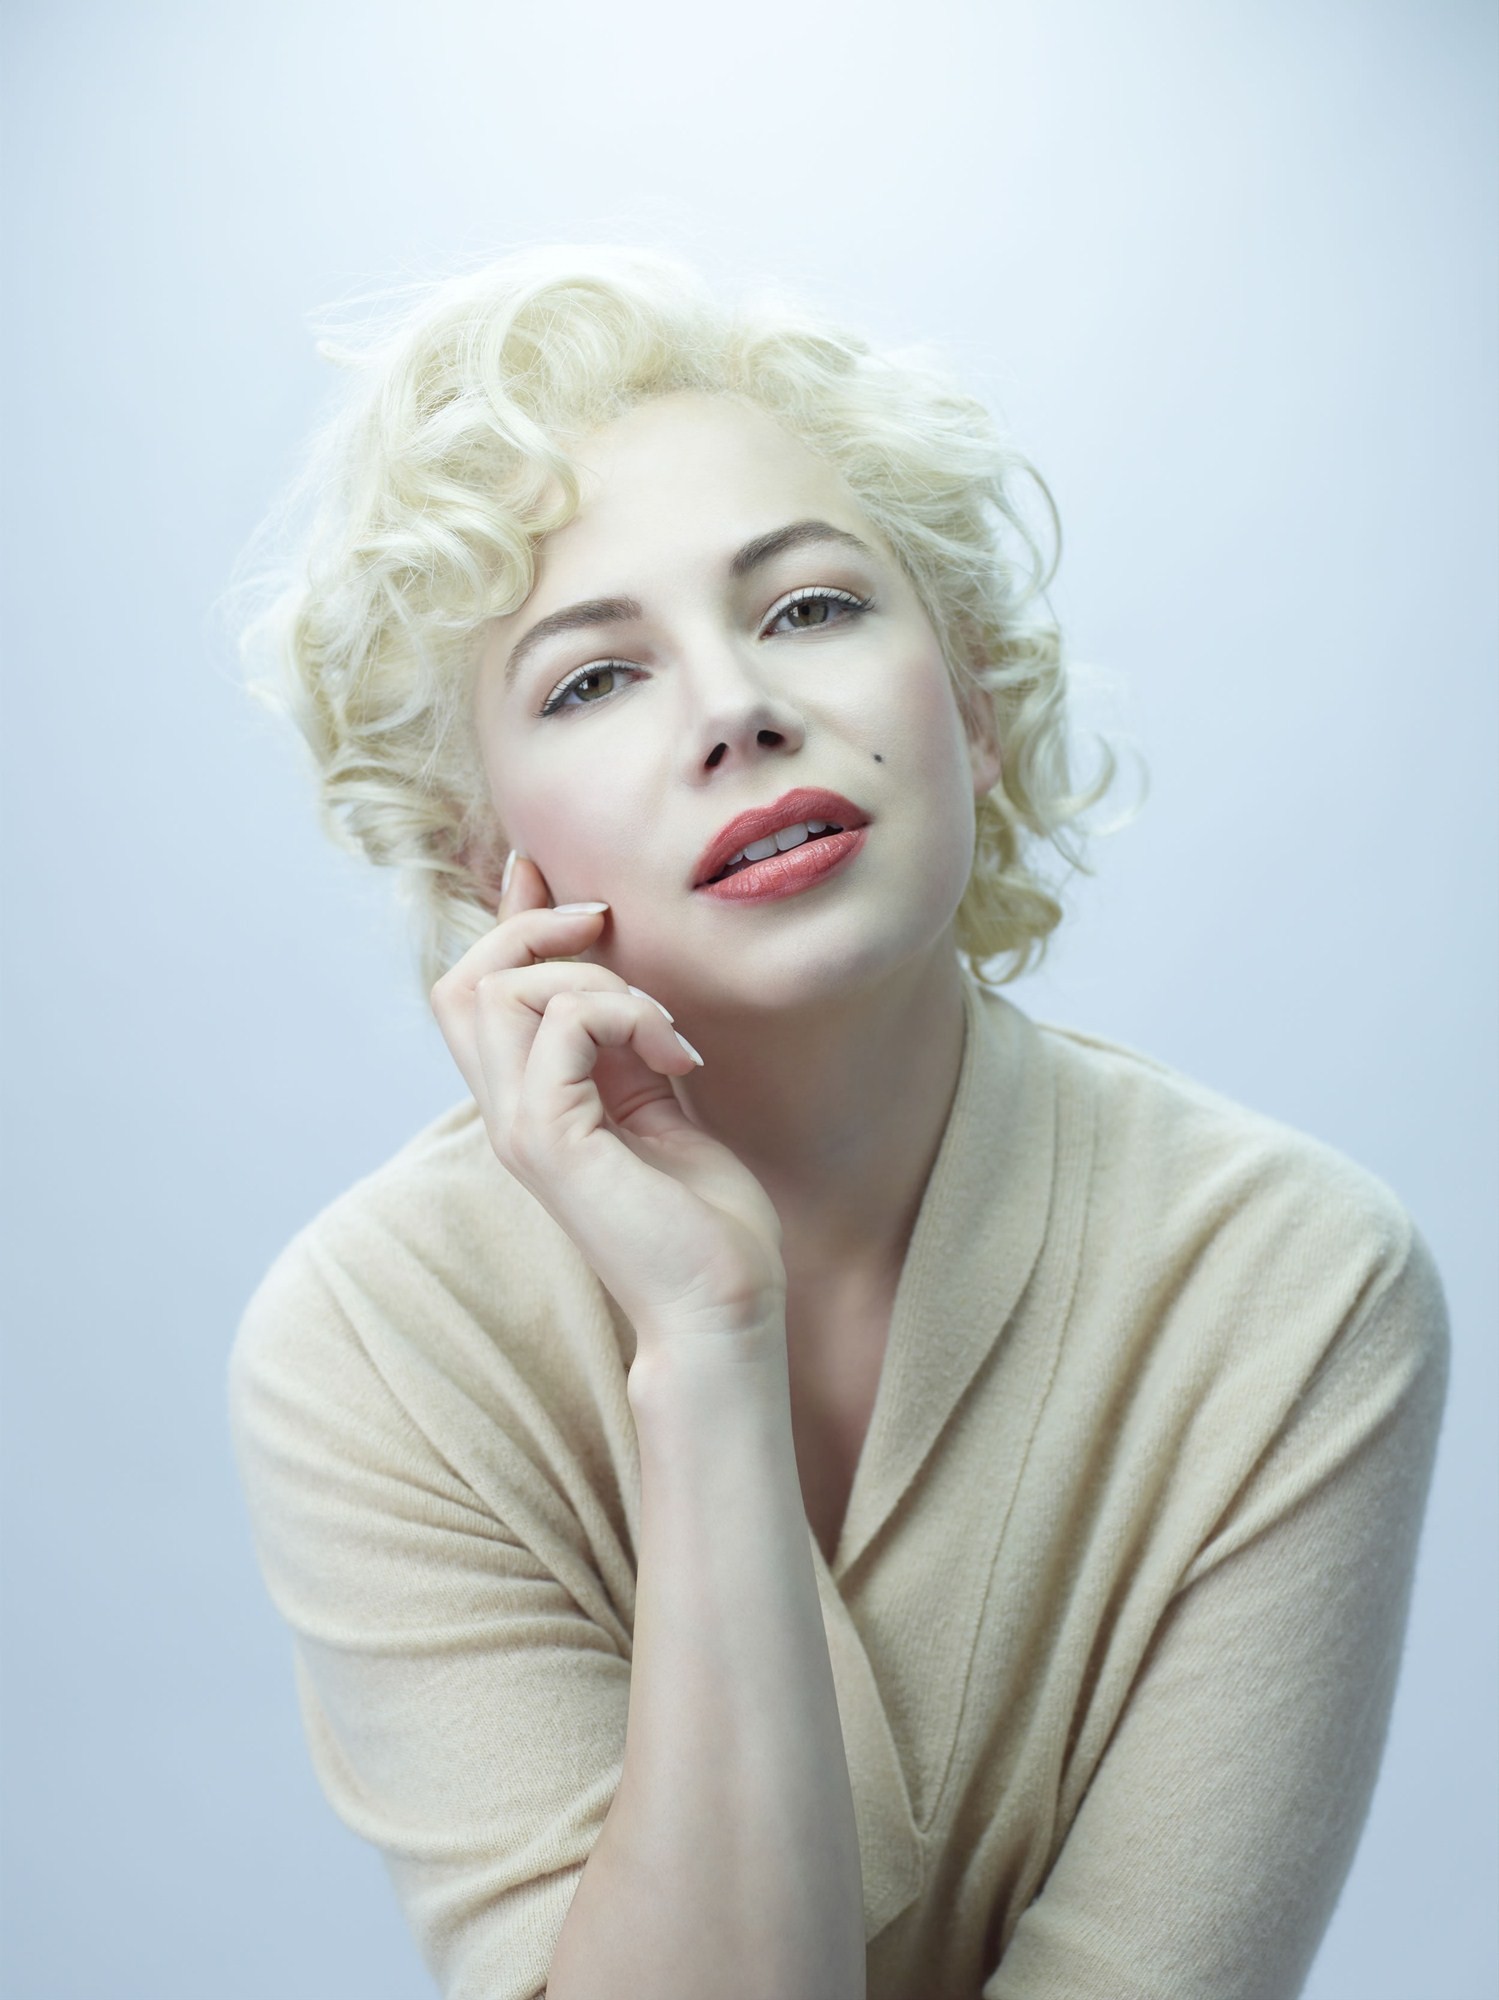 Michelle Williams stars as Marilyn Monroe  in The Weinstein Company's My Week with Marilyn (2011)